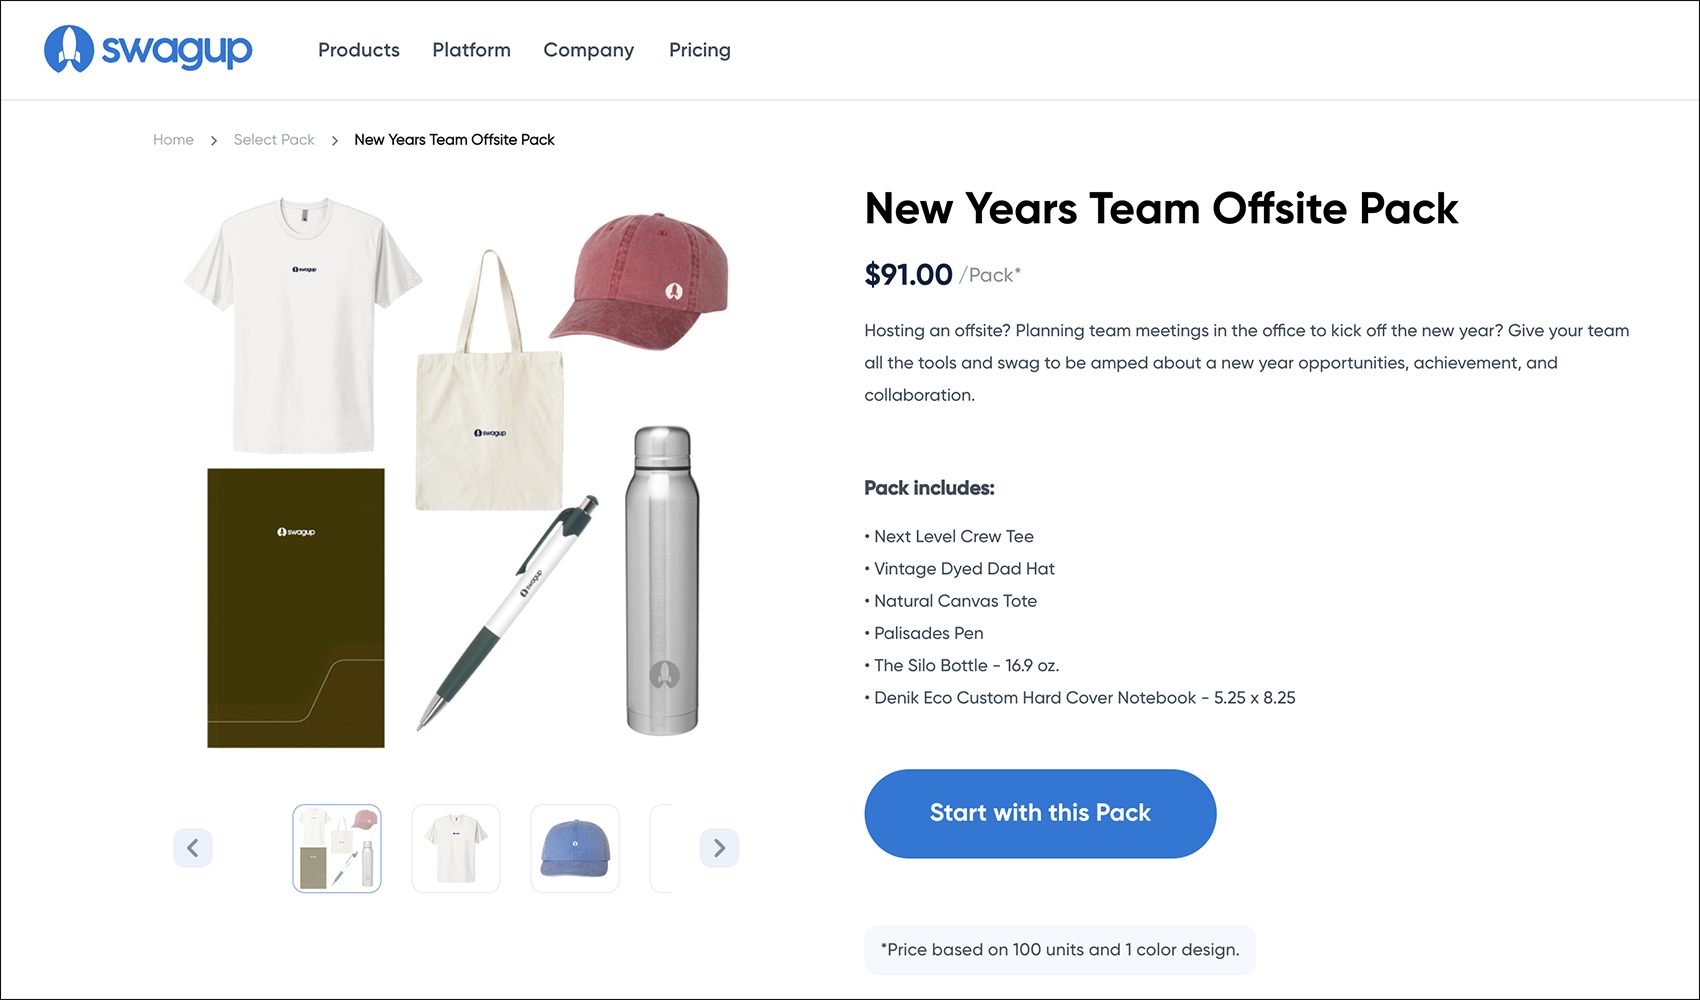 As a corporate gifting company, SwagUp offers branded swag packs like this New Years box. It includes various items we describe in more detail below. 